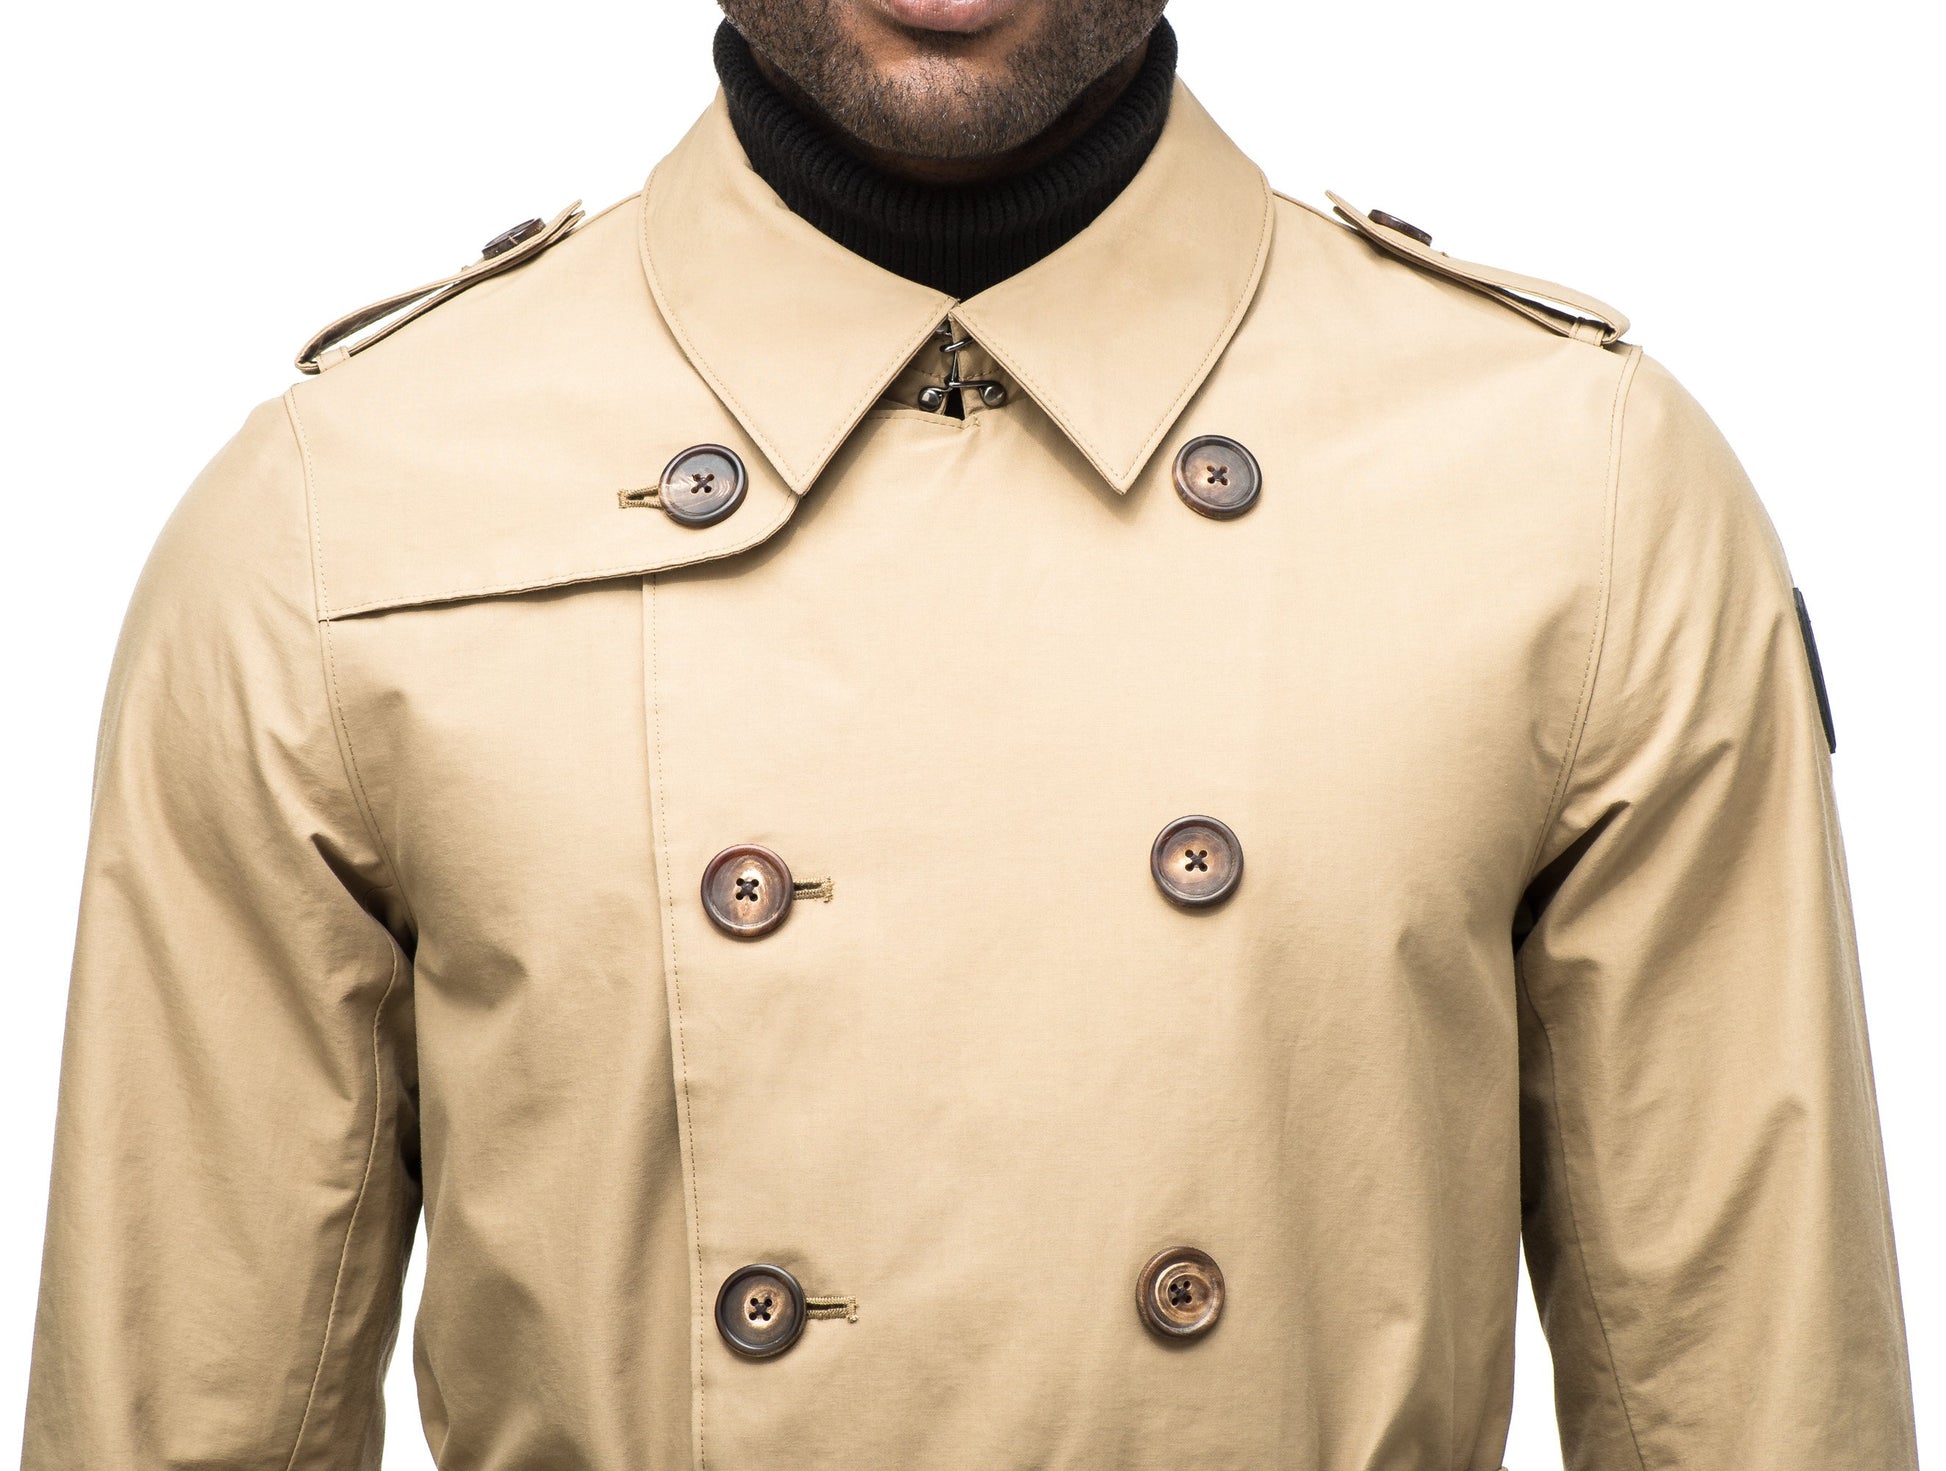 Men's thigh length trench coat with removable belt in Cork